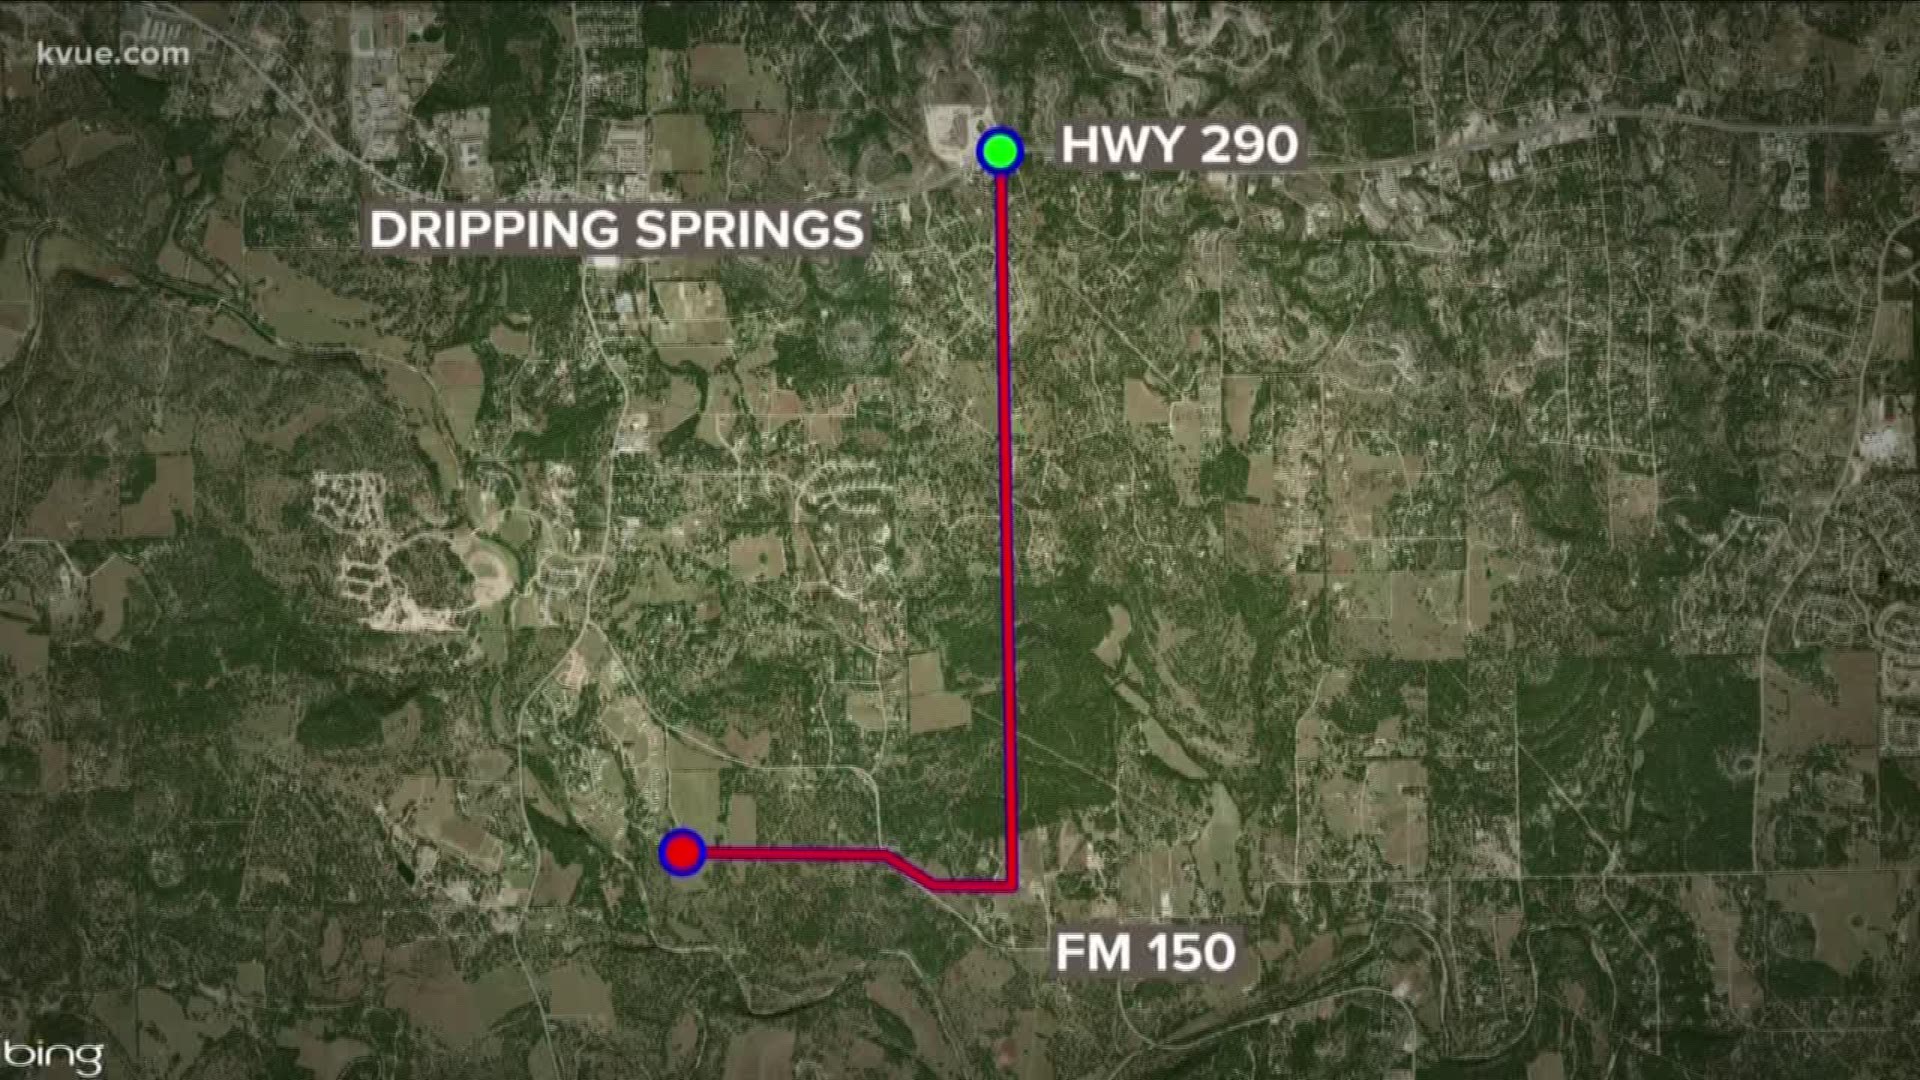 A battle is brewing over water and land in one of the fastest-growing cities in Central Texas.